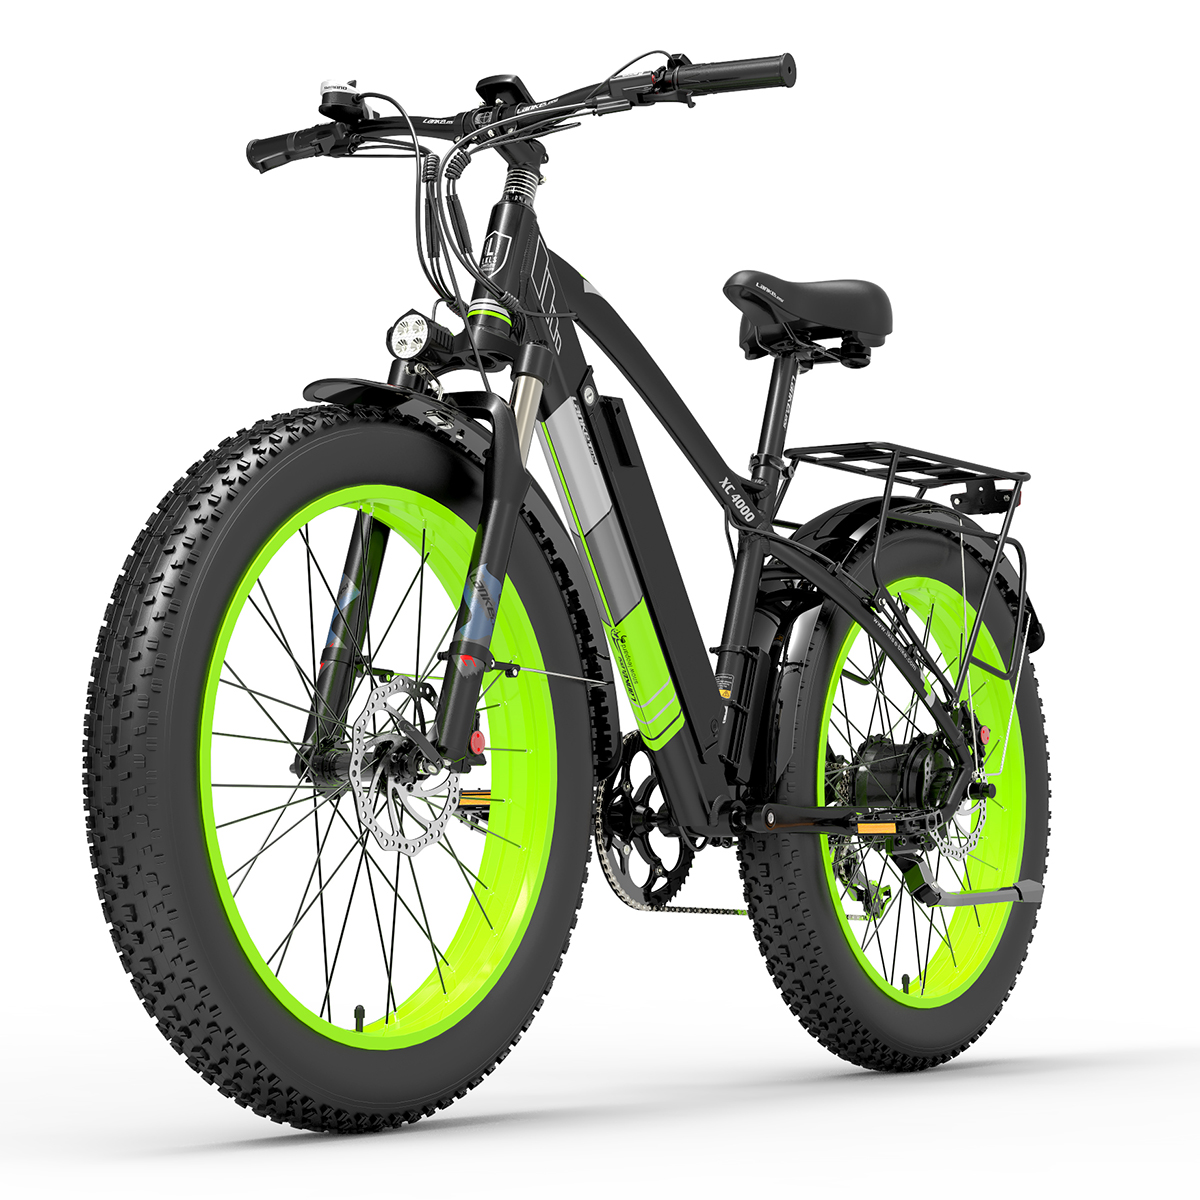 Find EU Direct LANKELEISI XC4000 14 5Ah 48V 1000W Electric Bicycle 26 Inches 100 120km Mileage Range Max Load 200kg for Sale on Gipsybee.com with cryptocurrencies